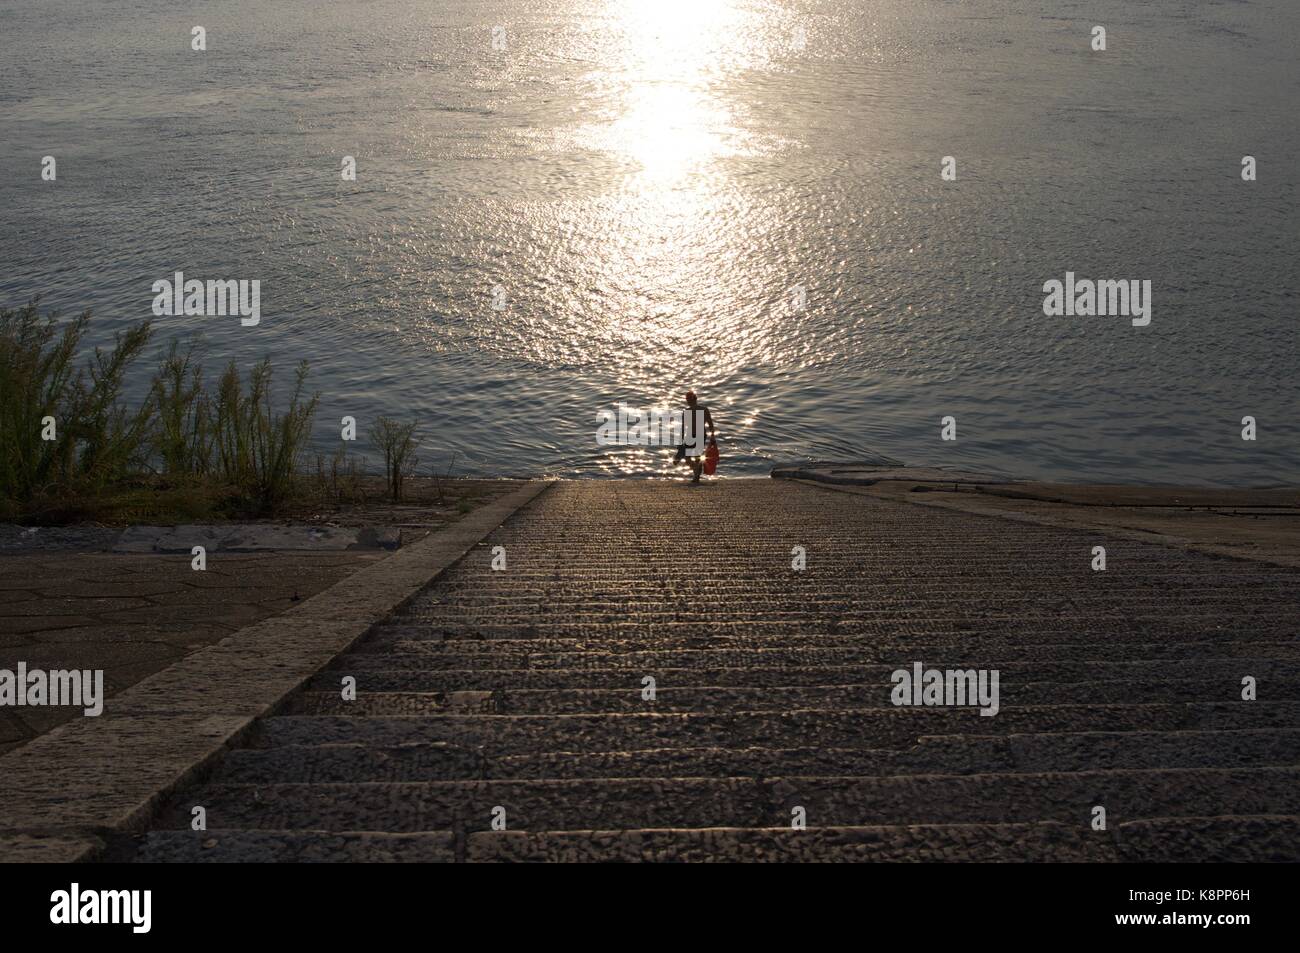 Yichang residents swim in the Yangtze river, downstream from the Three Gorges Dam, on a summer evening. August 2015. Stock Photo